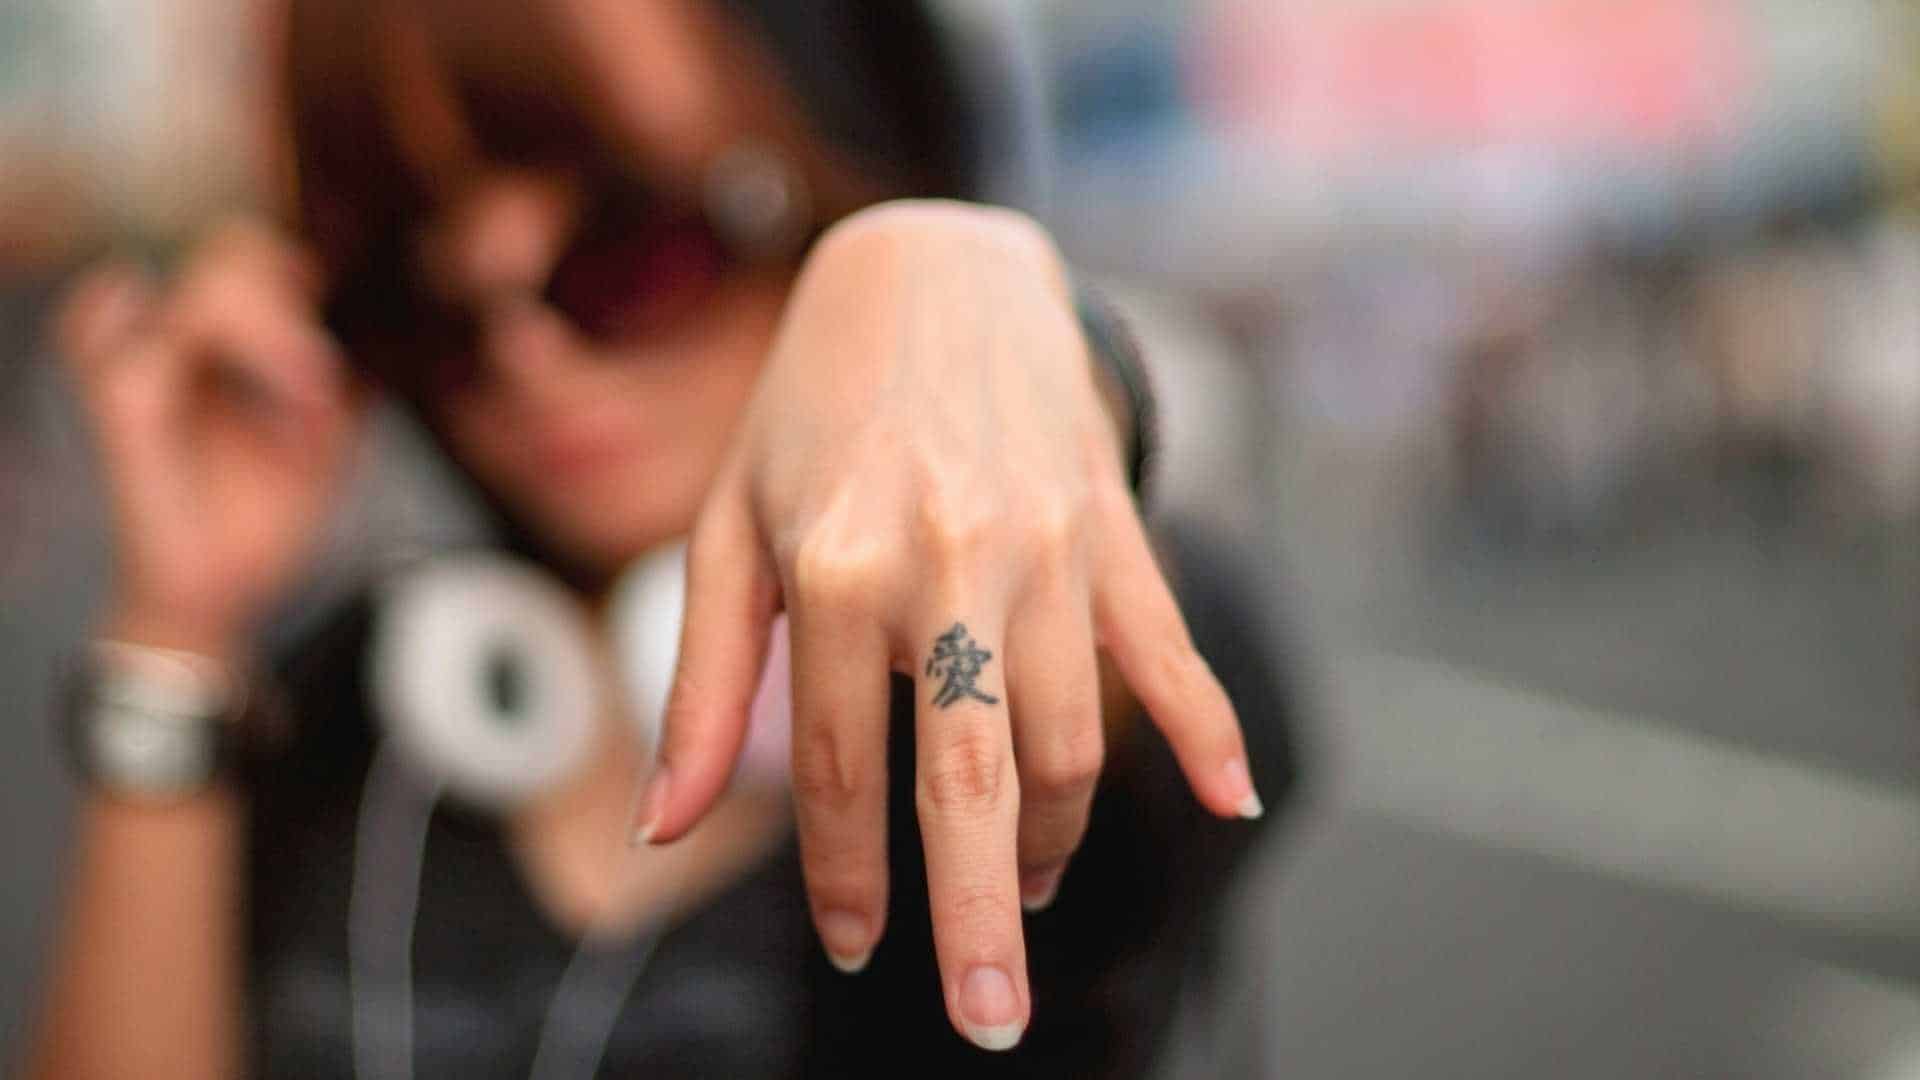 Guide to having Tattoos in Japan, which onsen allows tattoos